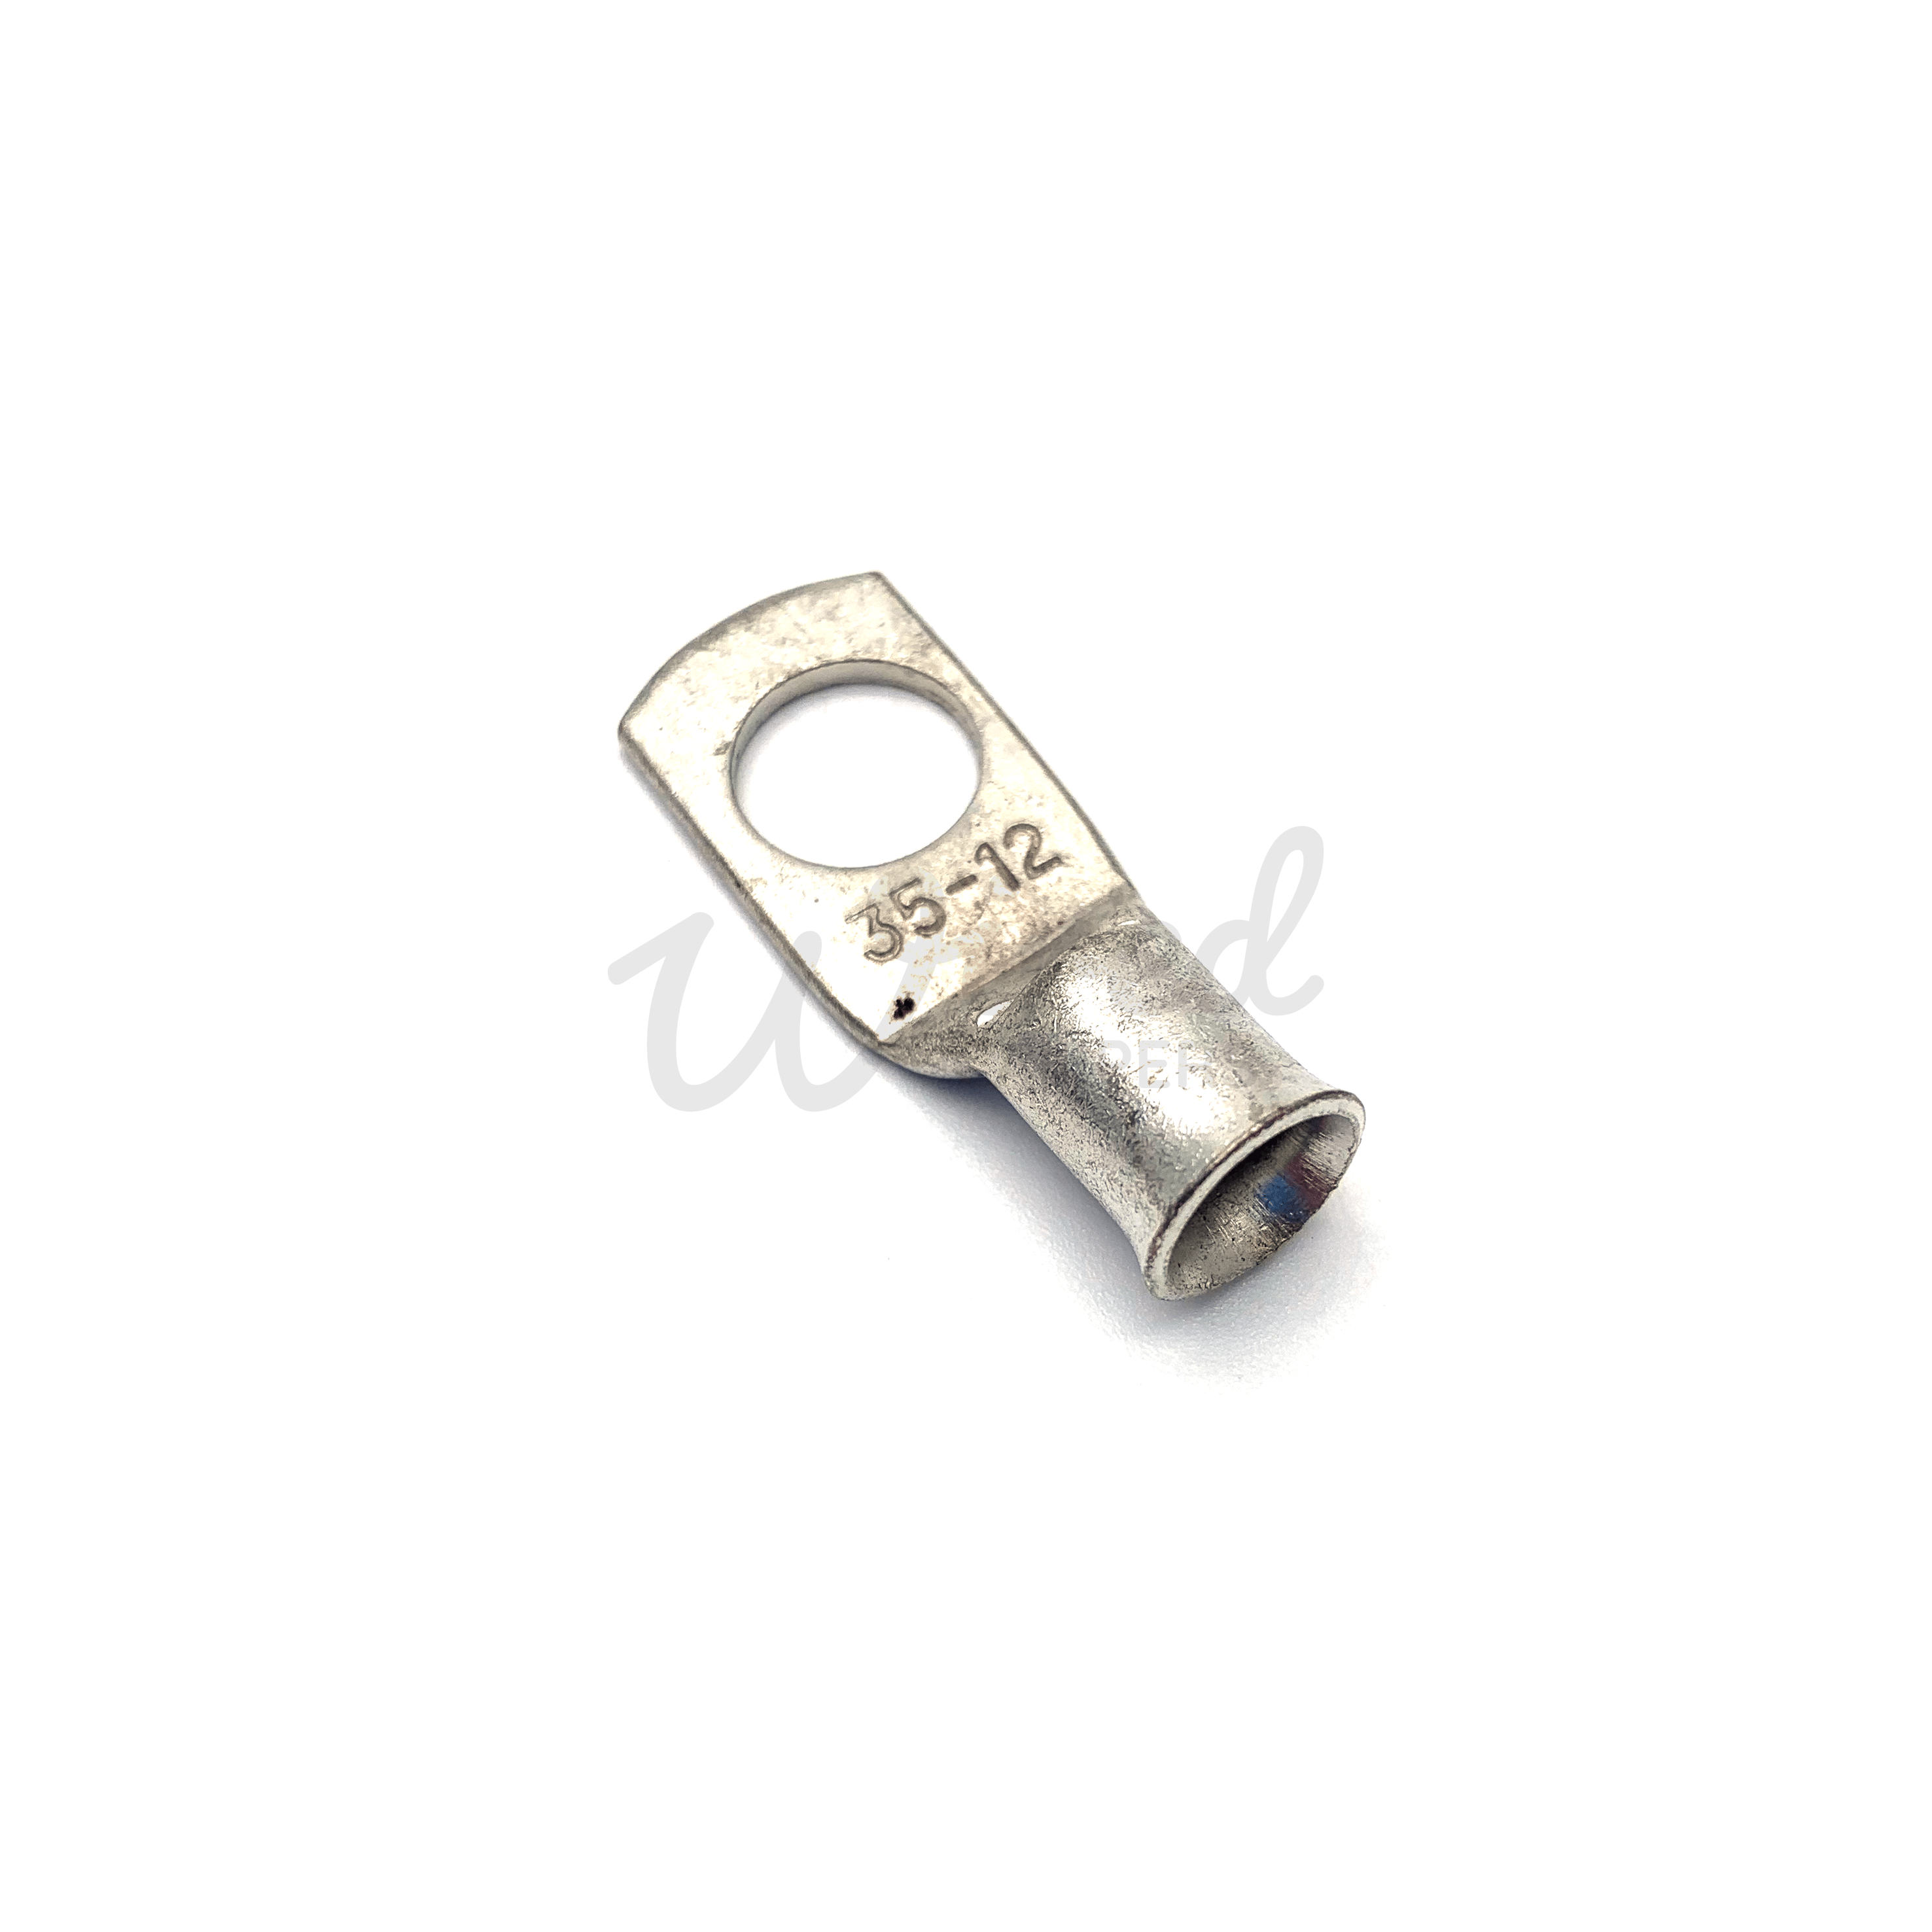 Wired Campers Limited 12mm 10 Pack - Copper Tube Crimp Ring Terminals 35mm² Cable Entry - 6mm/8mm/10mm/12mm Hole